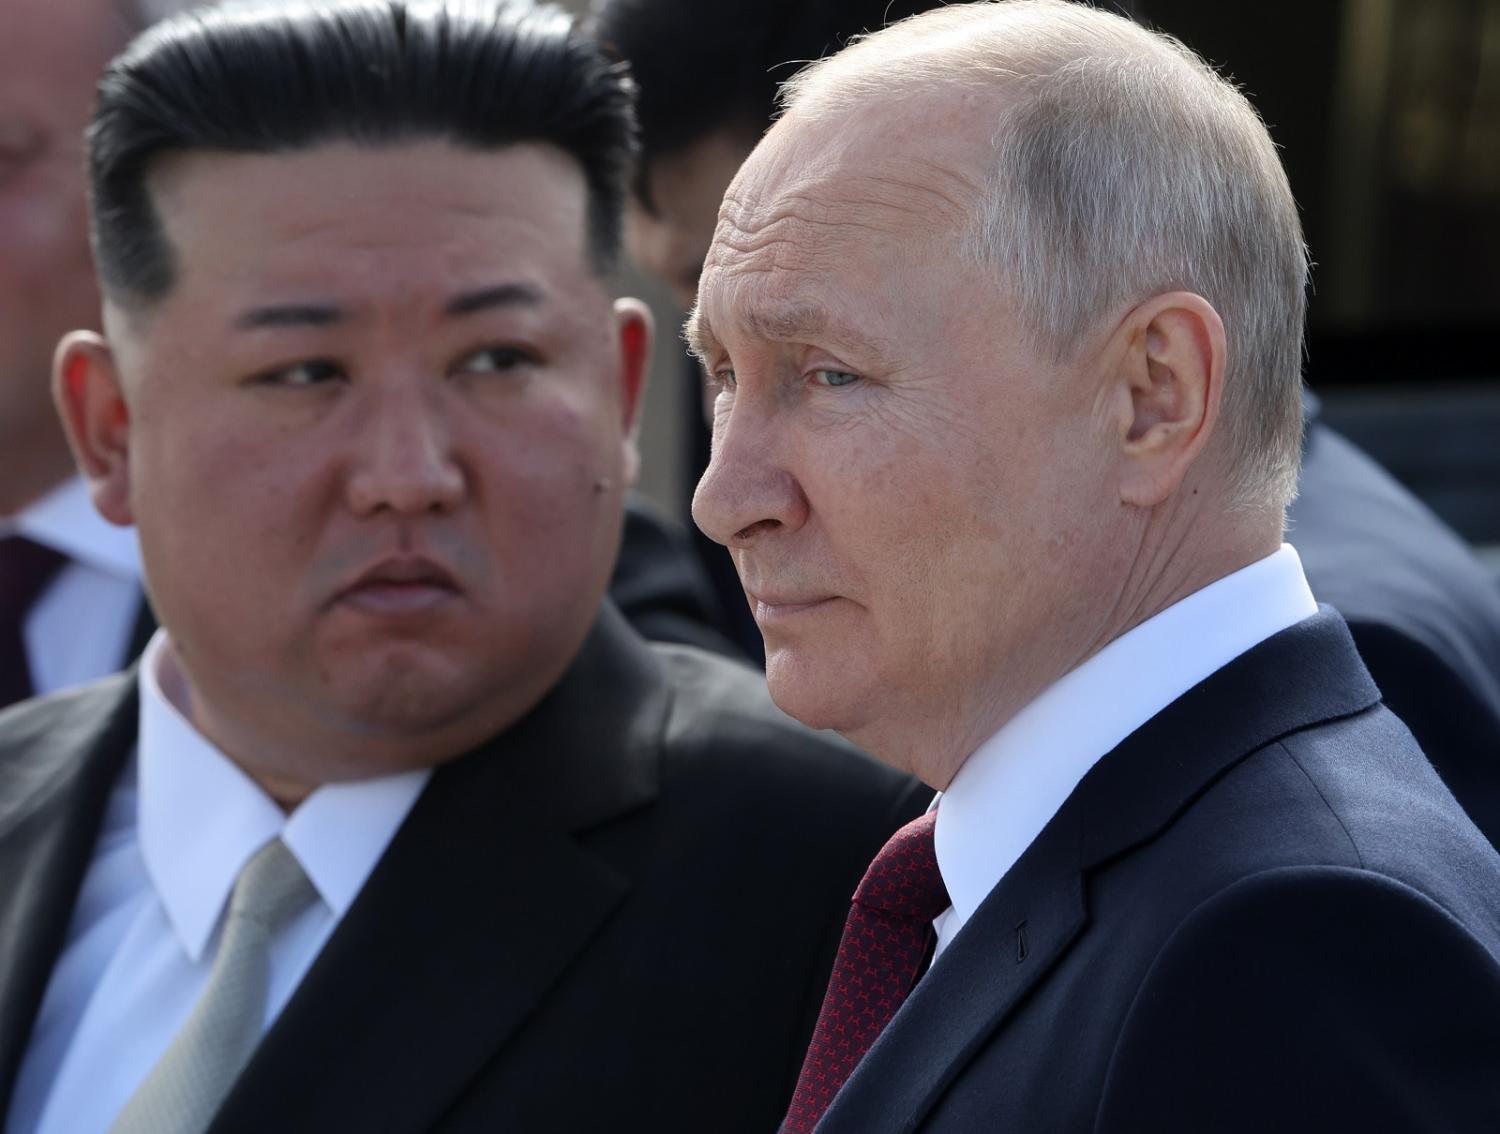 North Korean leader Kim Jong-un (L) and Russian President Vladimir Putin visit the construction site for the Angara rocket launch complex on 13 September in Tsiolkovsky, Russia (Getty Images)